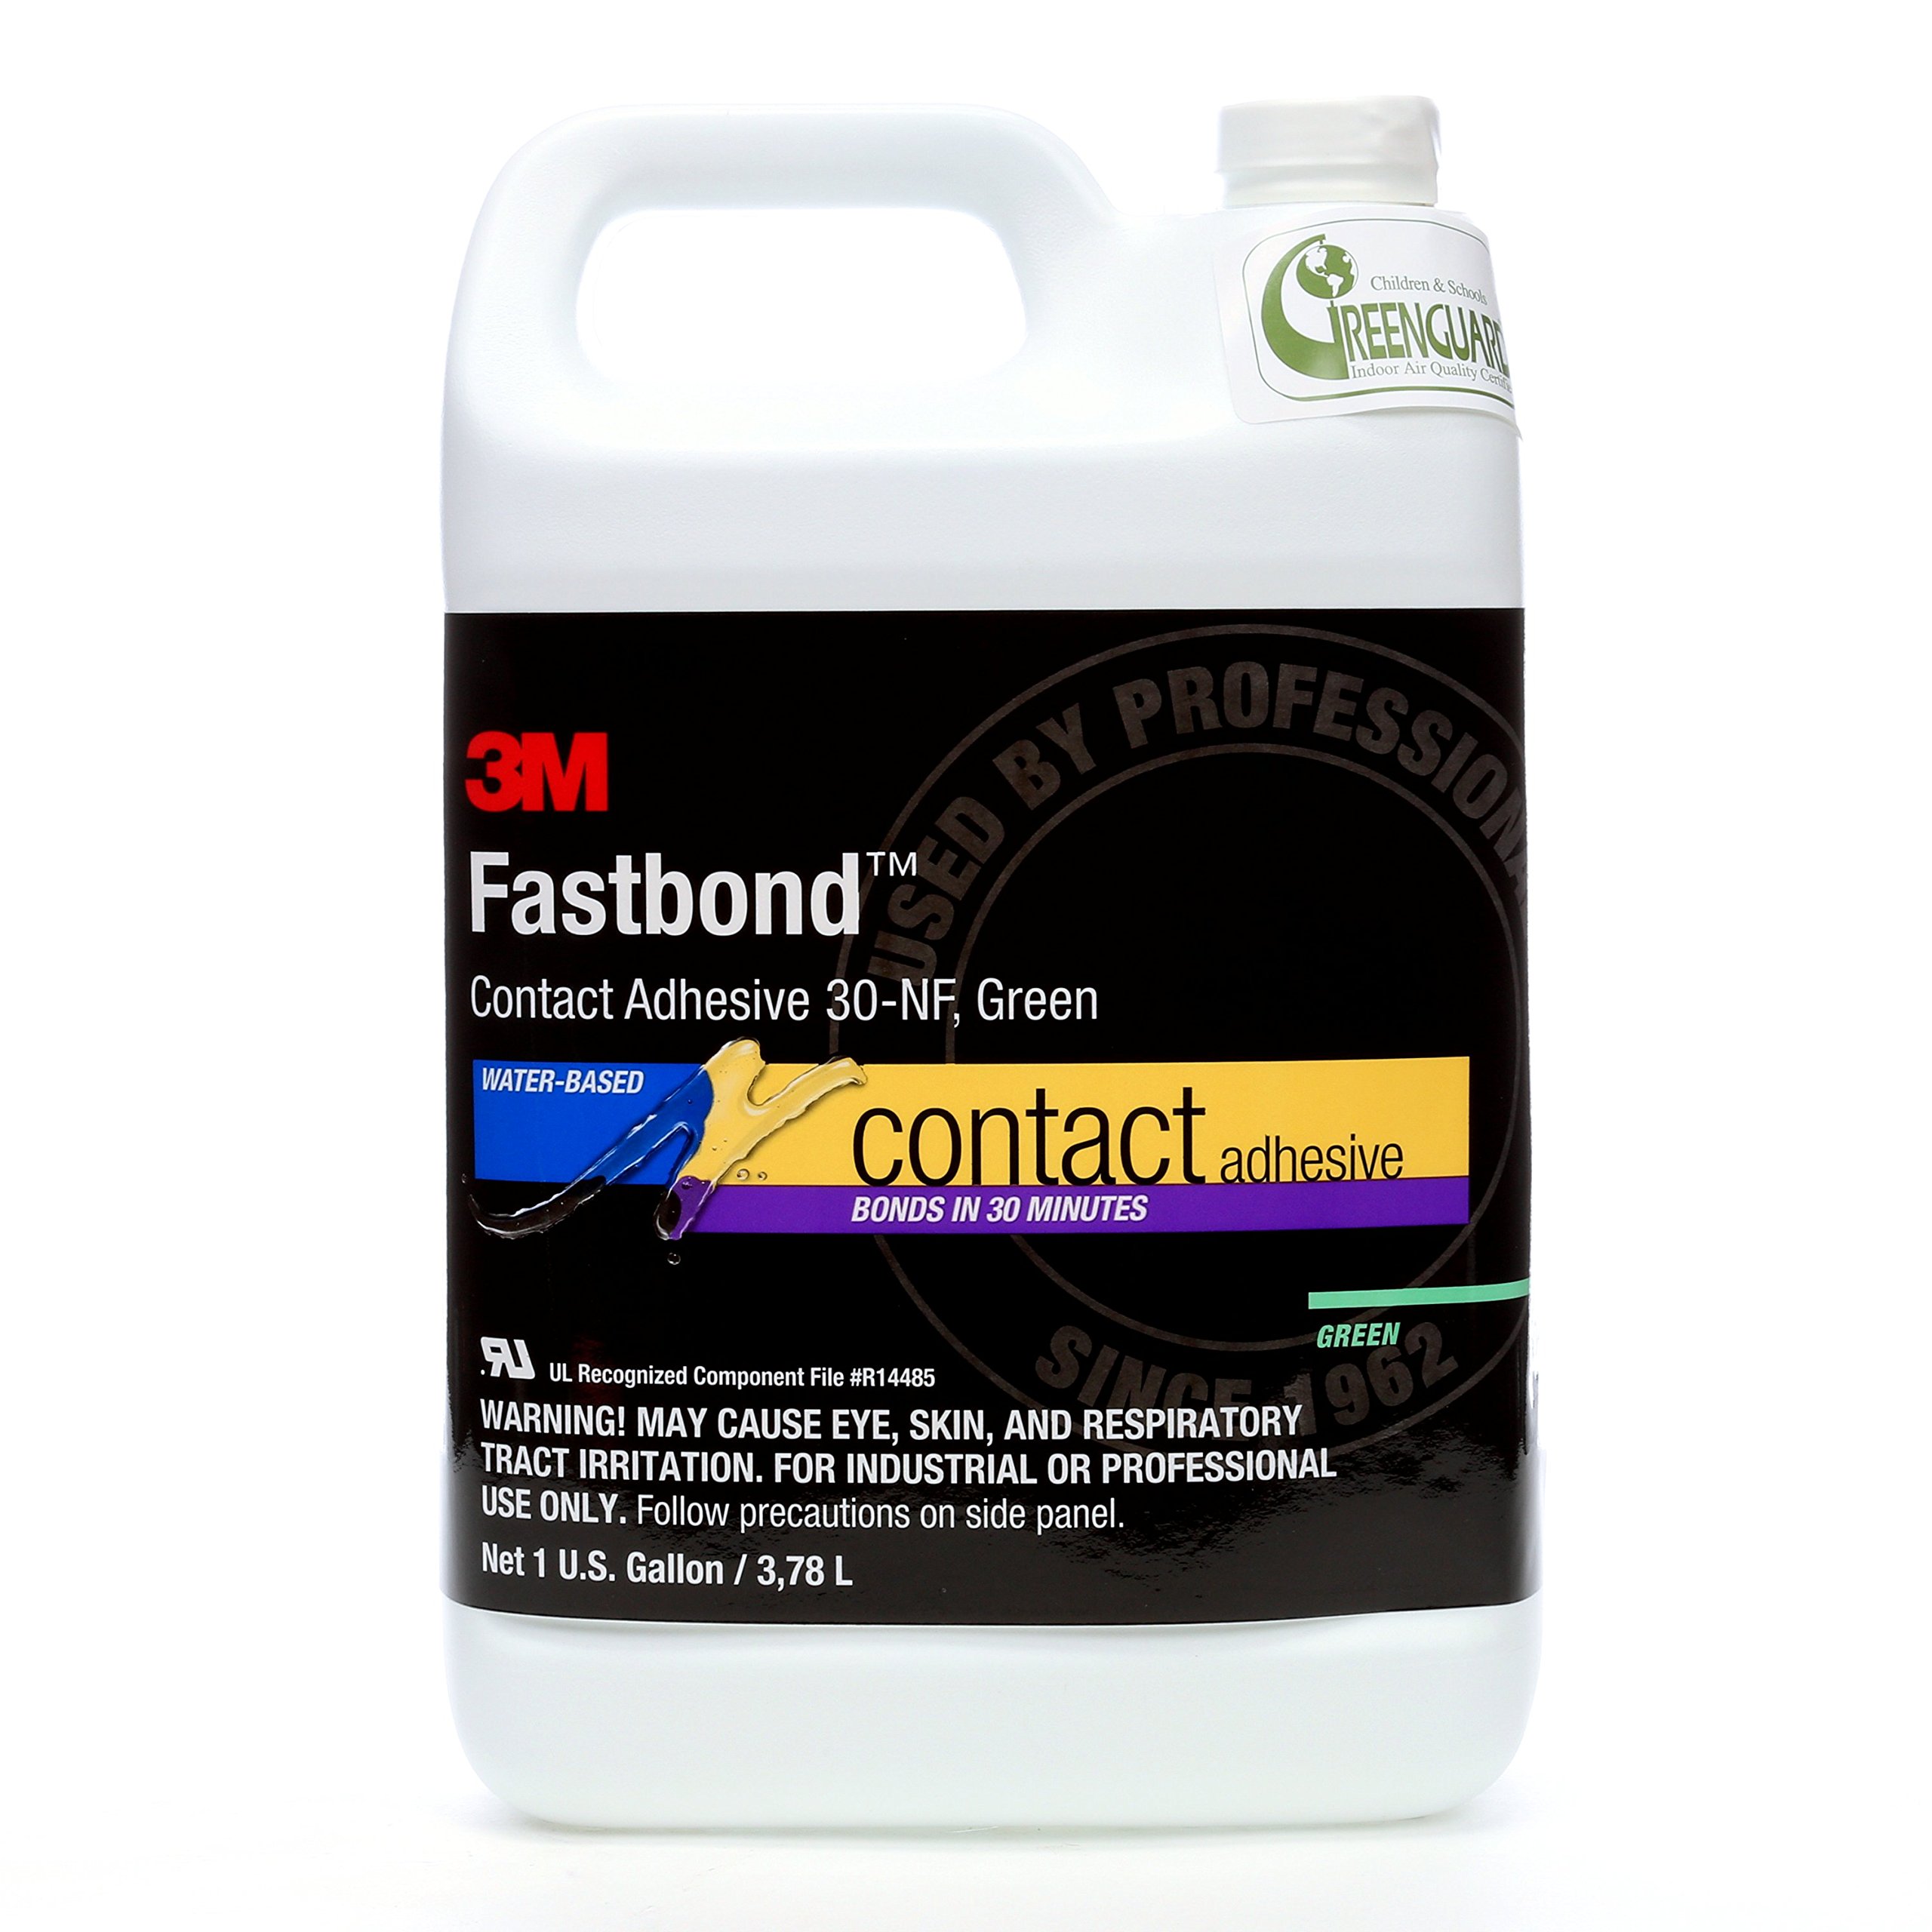 3M Fastbond Contact Adhesive 30NF, Neutral